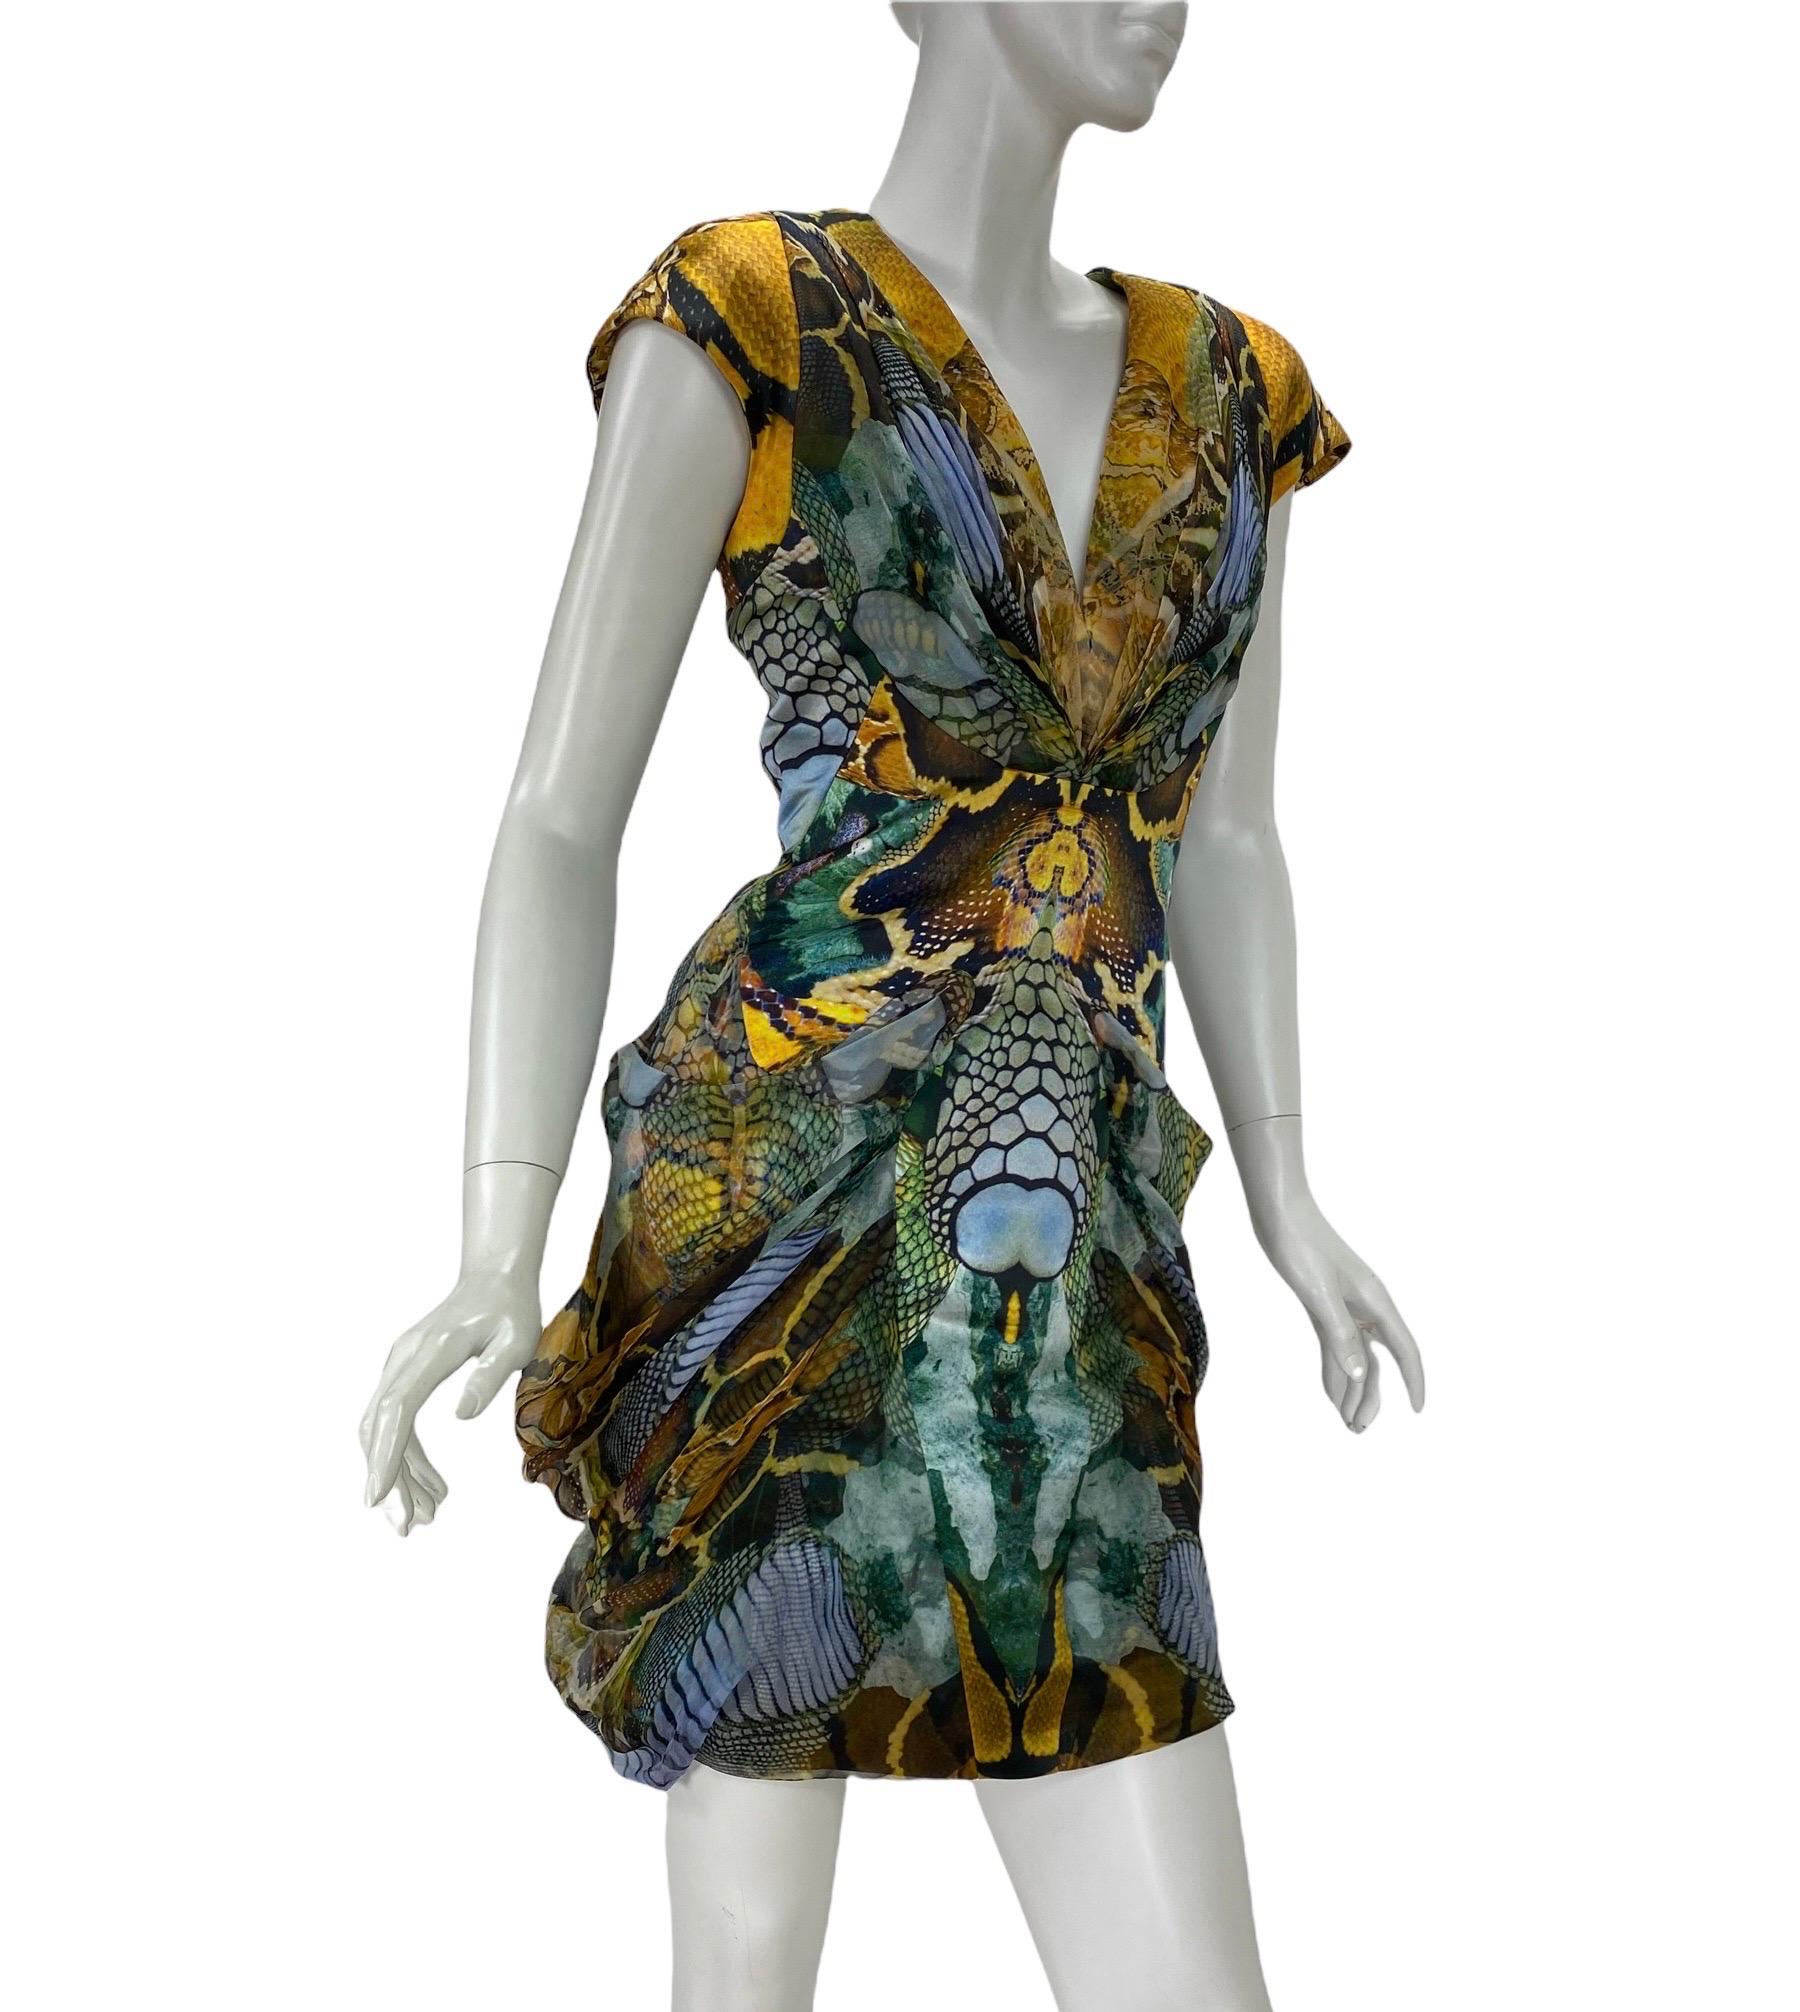 Alexander McQueen Plato's Atlantis Dress 
Featured in New York: The Museum at FIT and cover of A-Z Fashion Designers book. Also, this particular dress was chosen to represent Alexander Mcqueen brand on Wikipedia! 
Spring/Summer 2010 Ready-to-Wear.